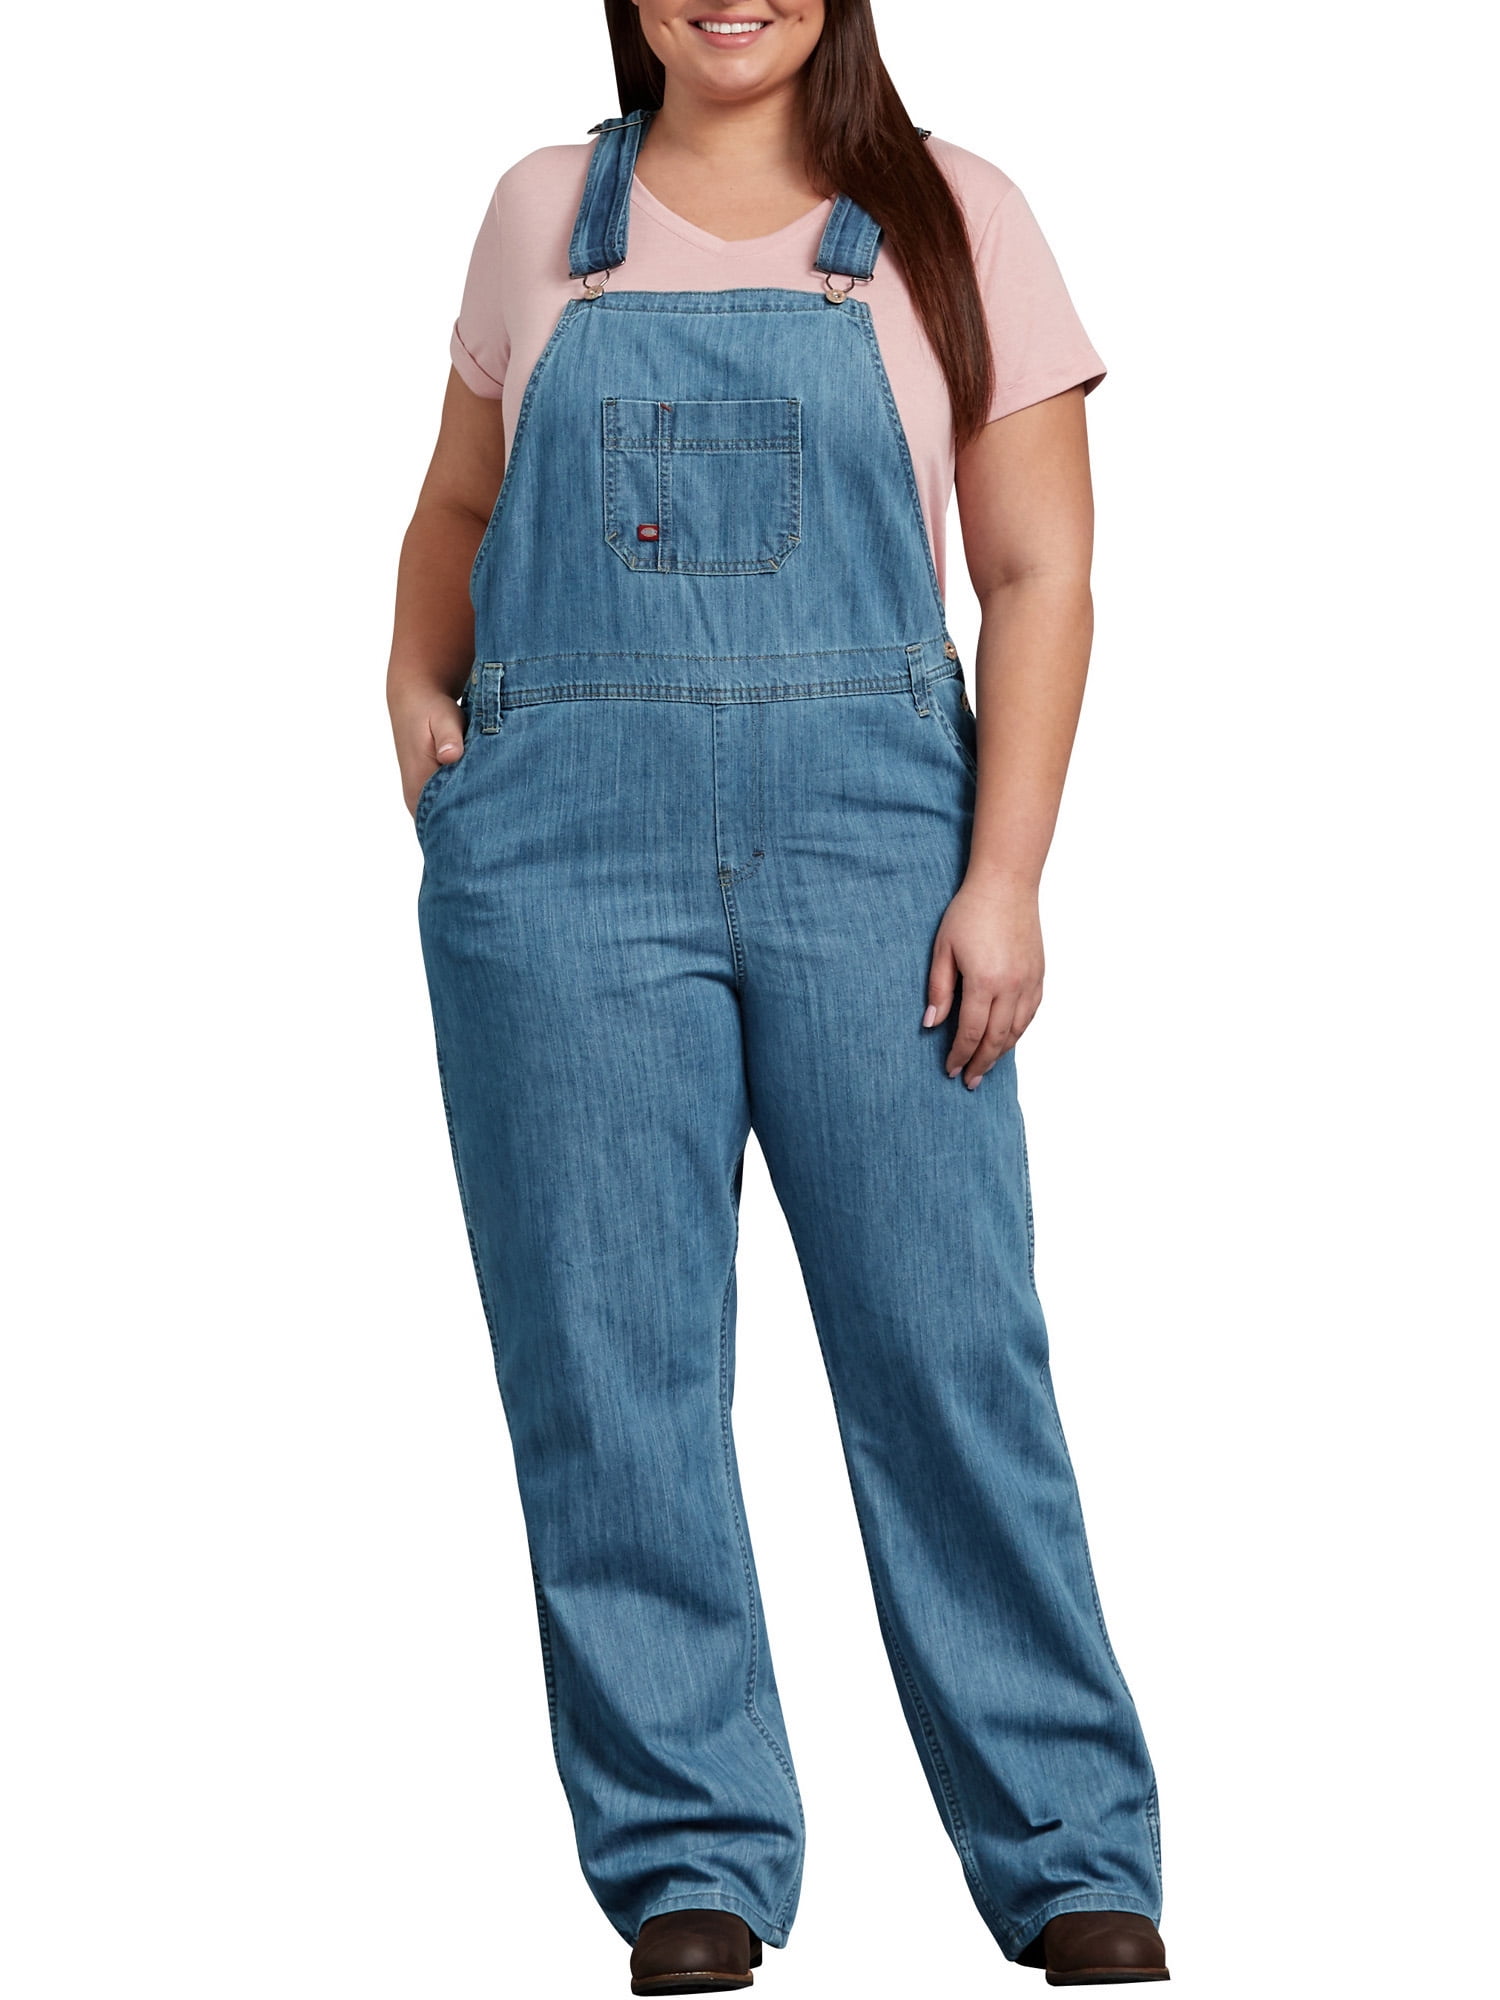 Mens Bib and Brace Dungaree Overalls for Man Pro Wear Workwear Engineer Coverall